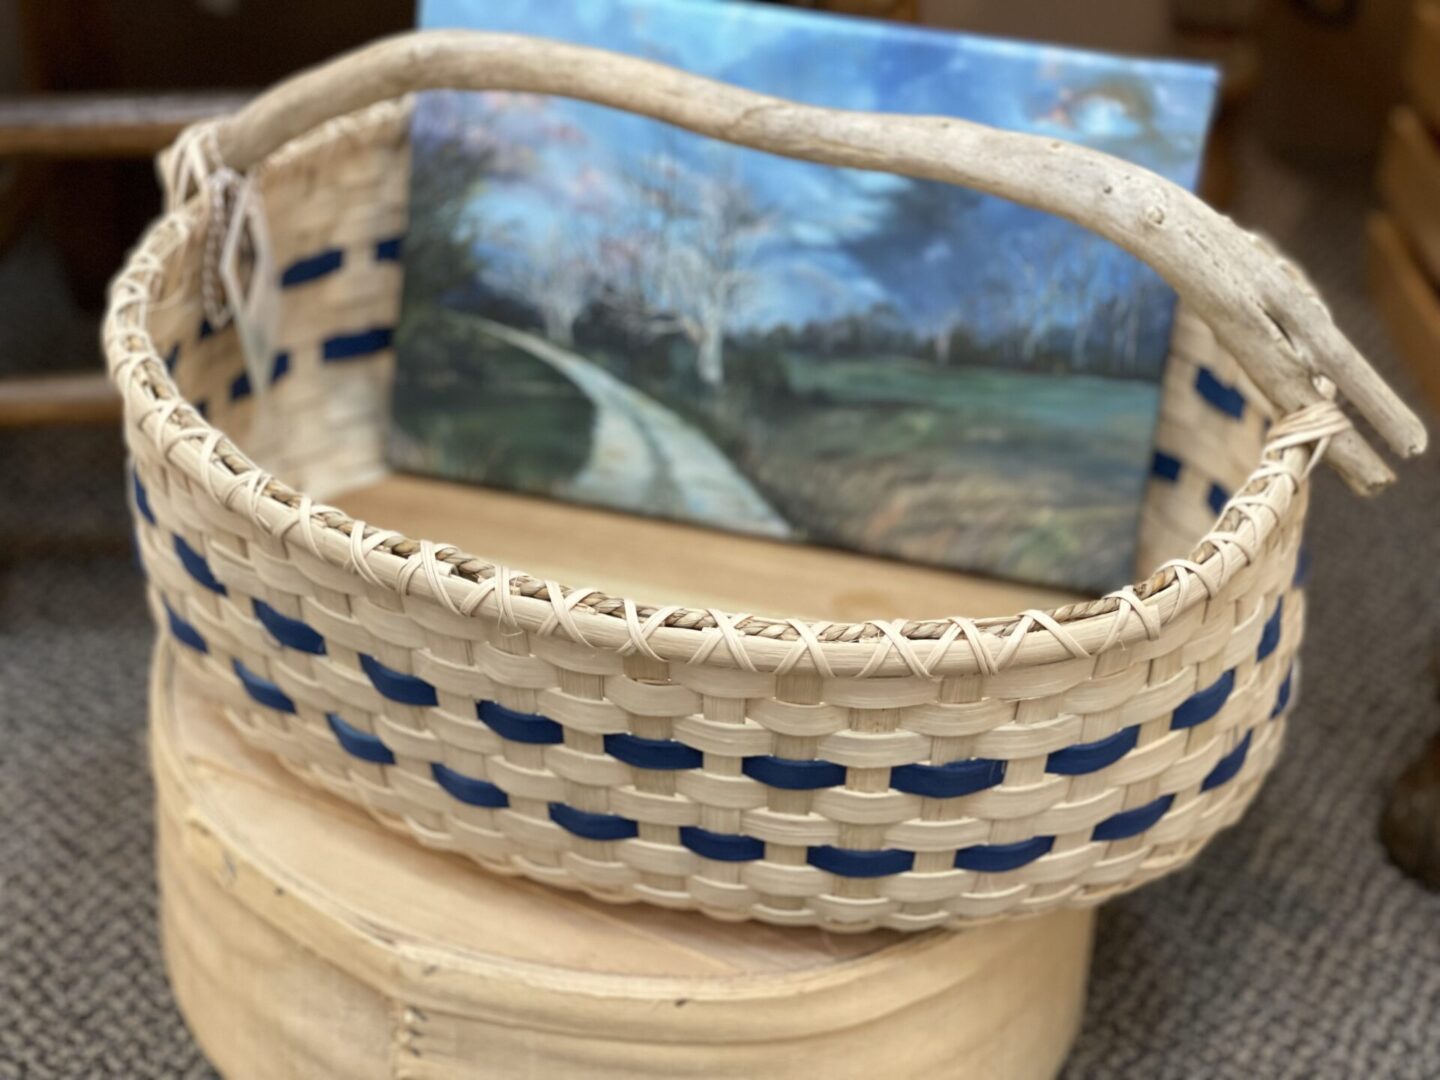 A blue and white basket with a picture on it.